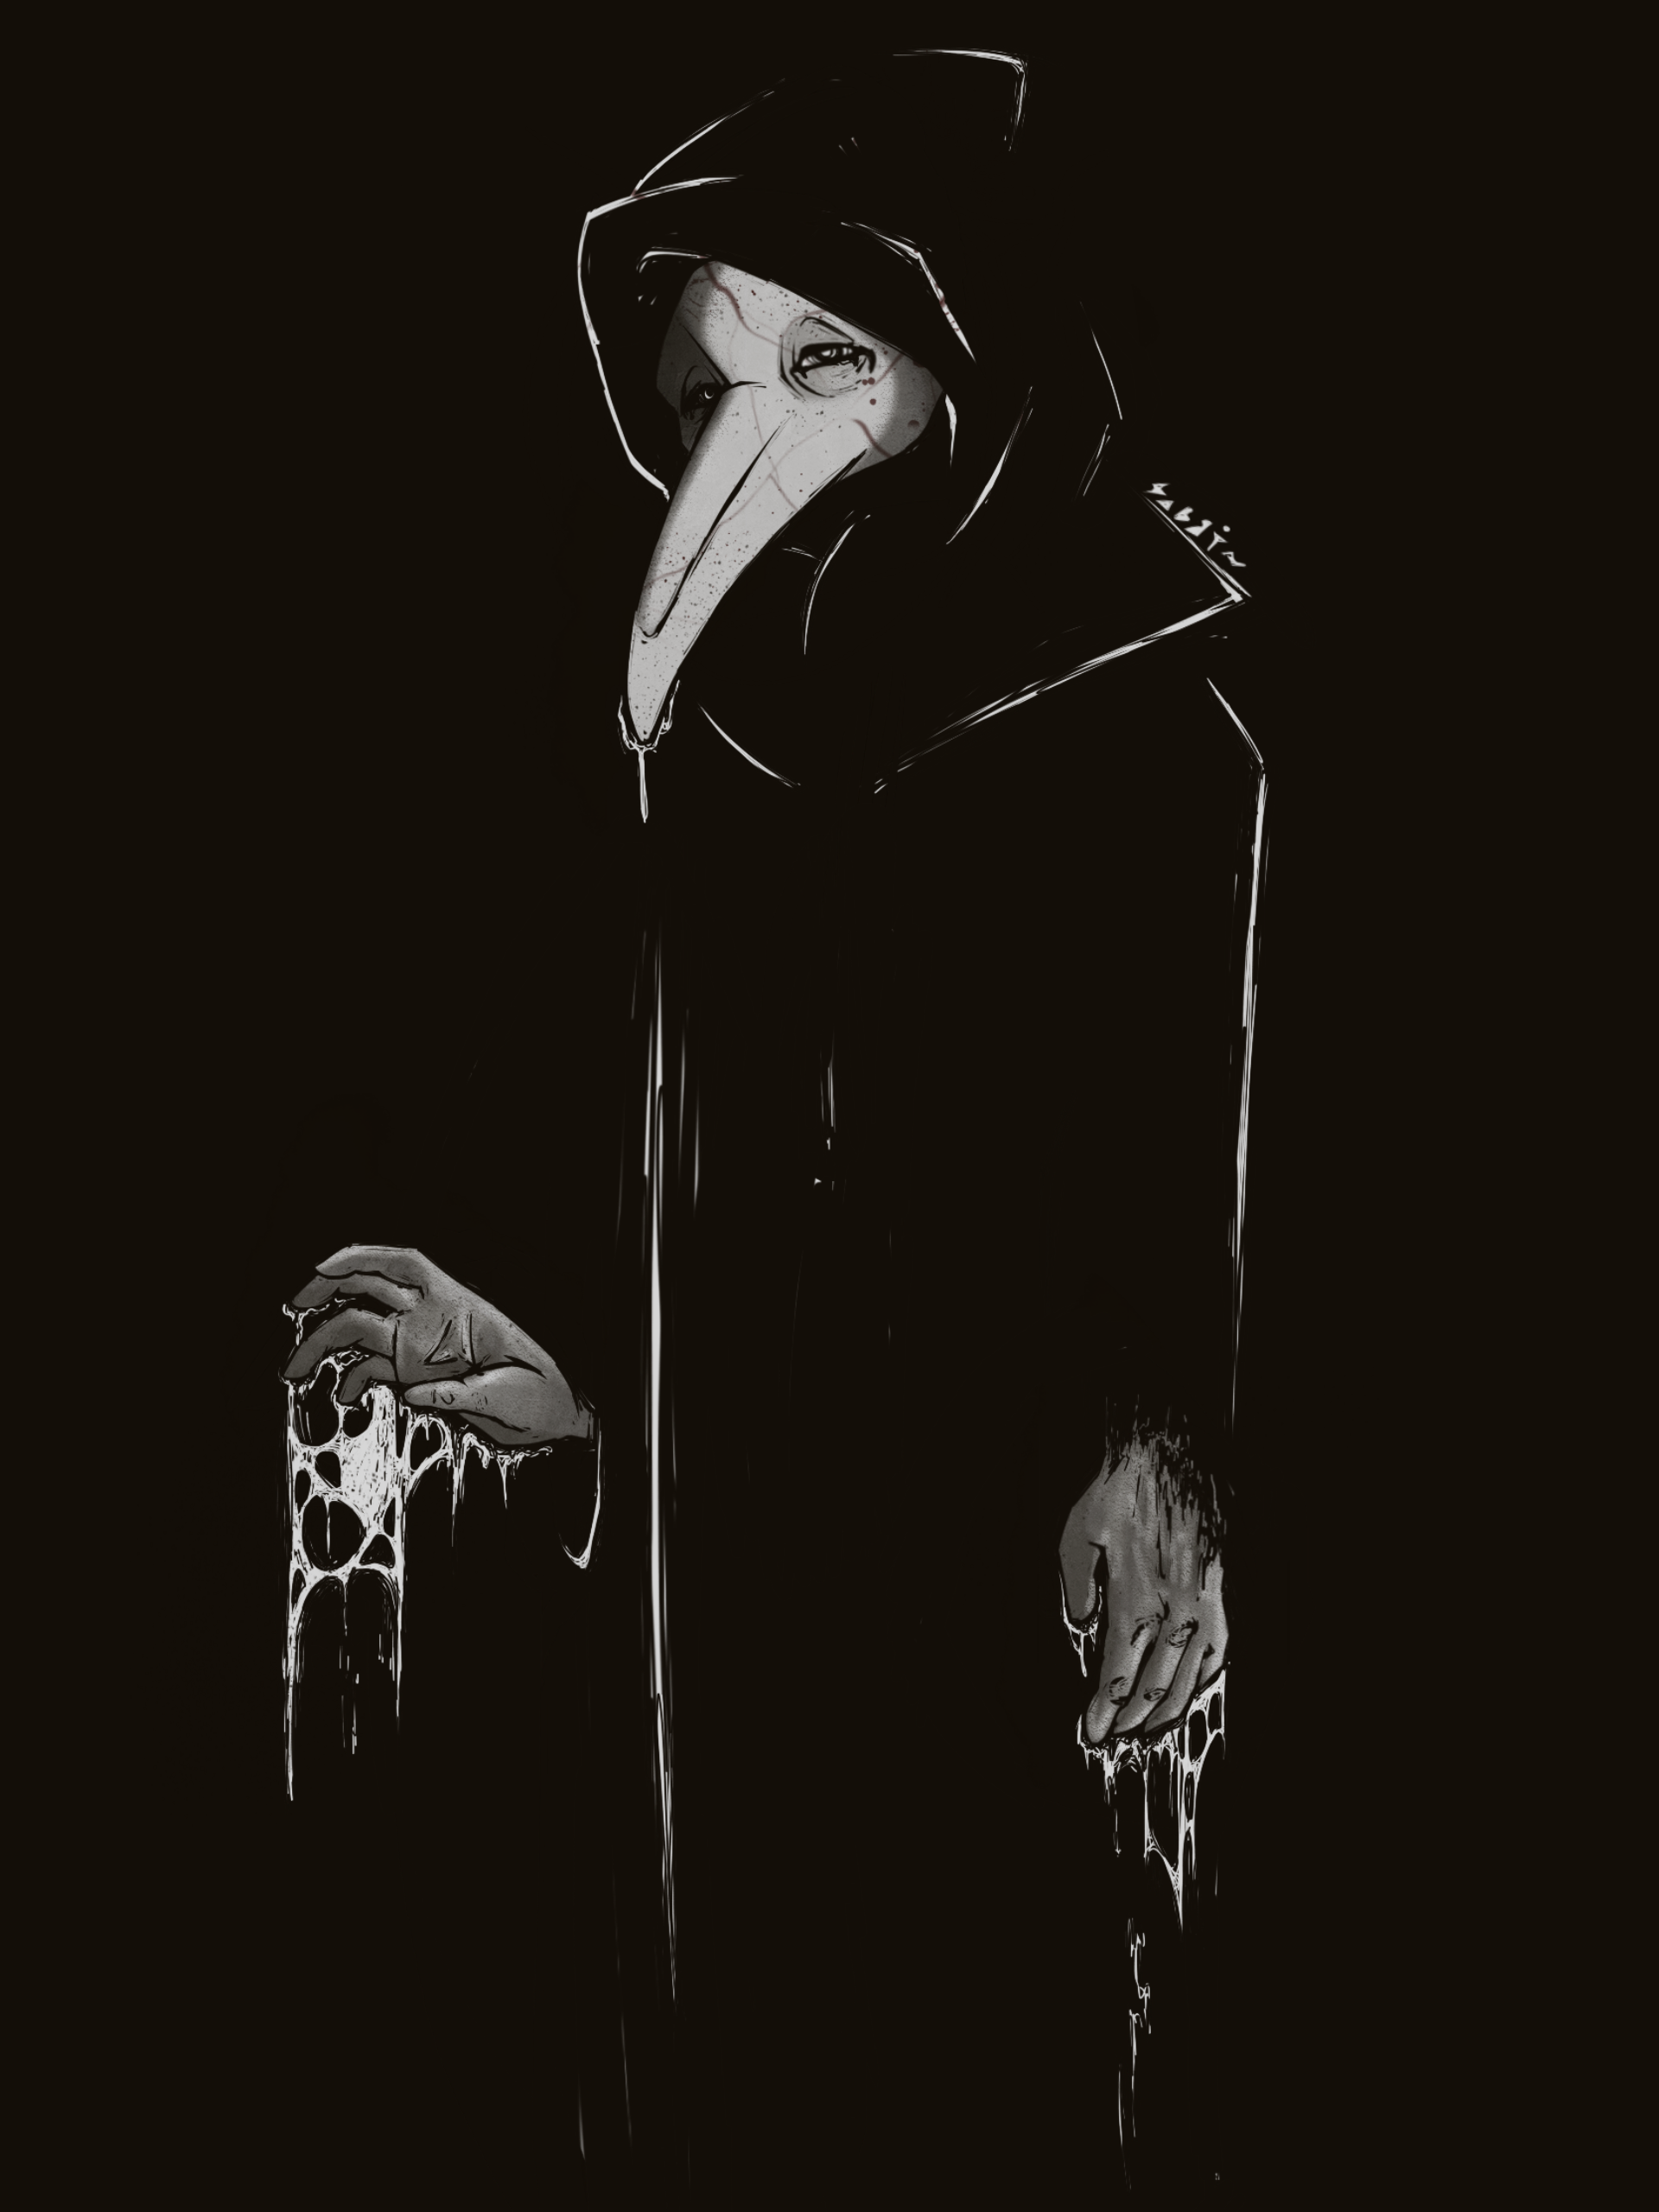 SCP-049 and others on SCP-049PlagueDoctor - DeviantArt